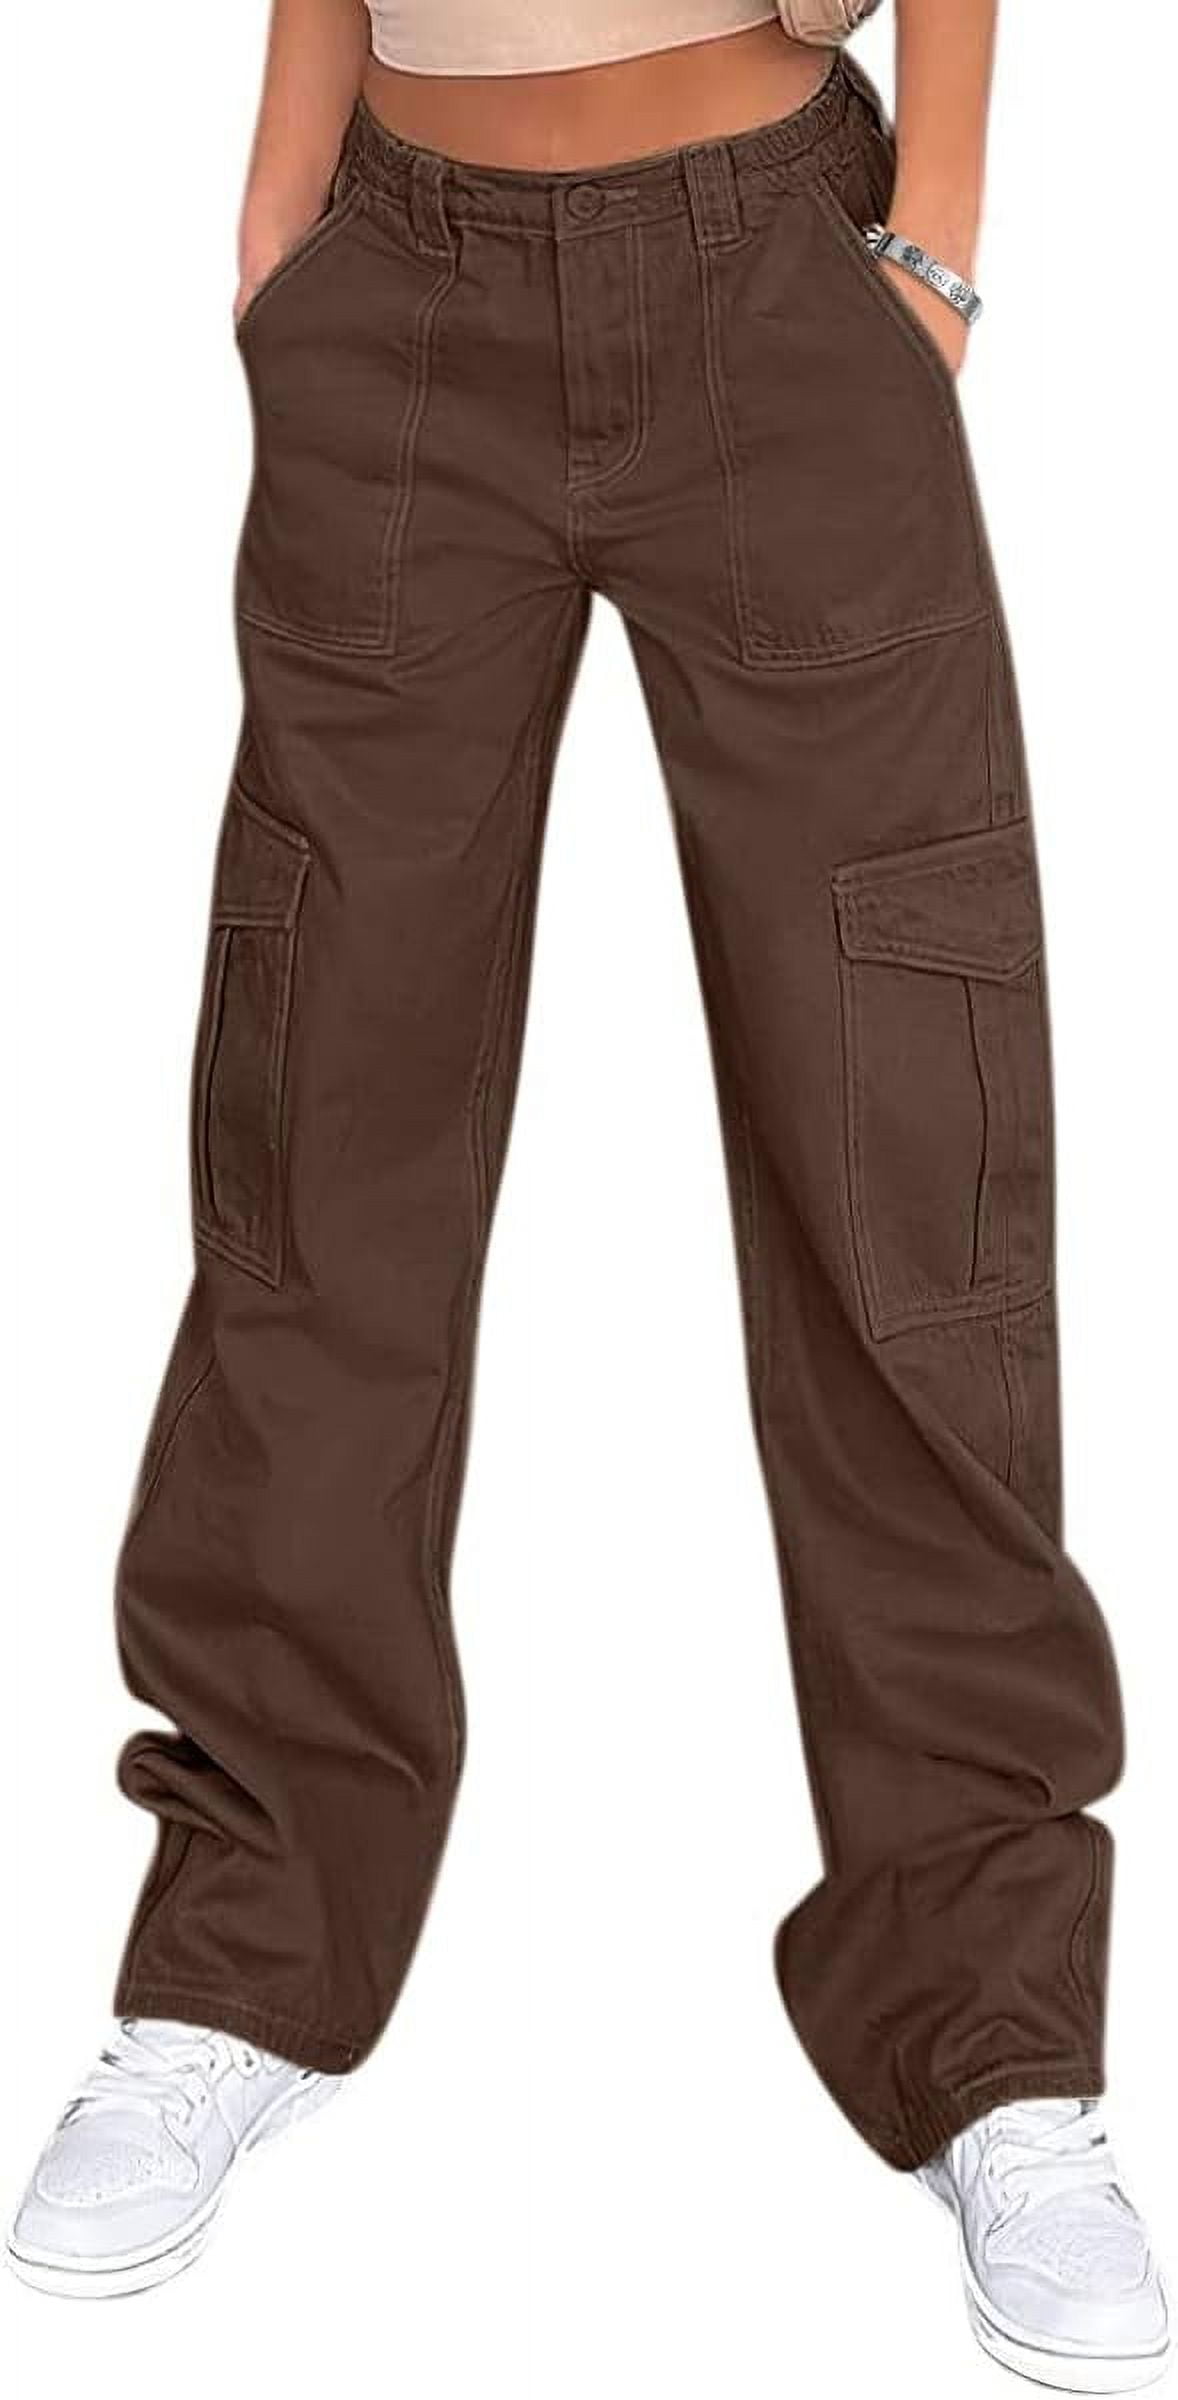 Lepunuo Cargo Pants for Women High Waisted Casual Pants Baggy Stretchy ...